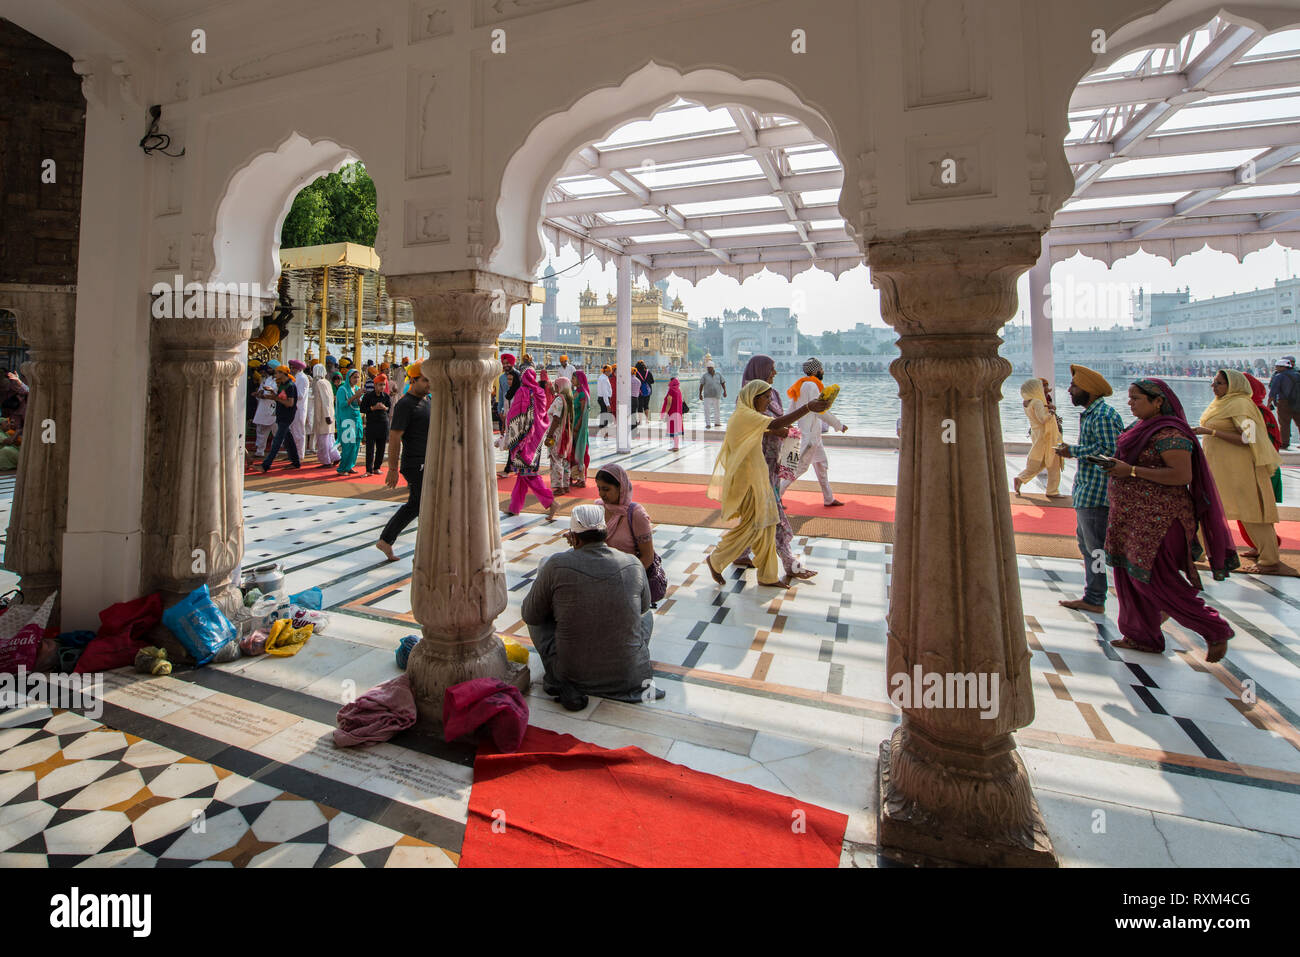 INDIA, PUNJAB, AMRITSAR, Pilgrims at the golden temple of amritsar. The temple is the most holy shrine for the sikh community Stock Photo